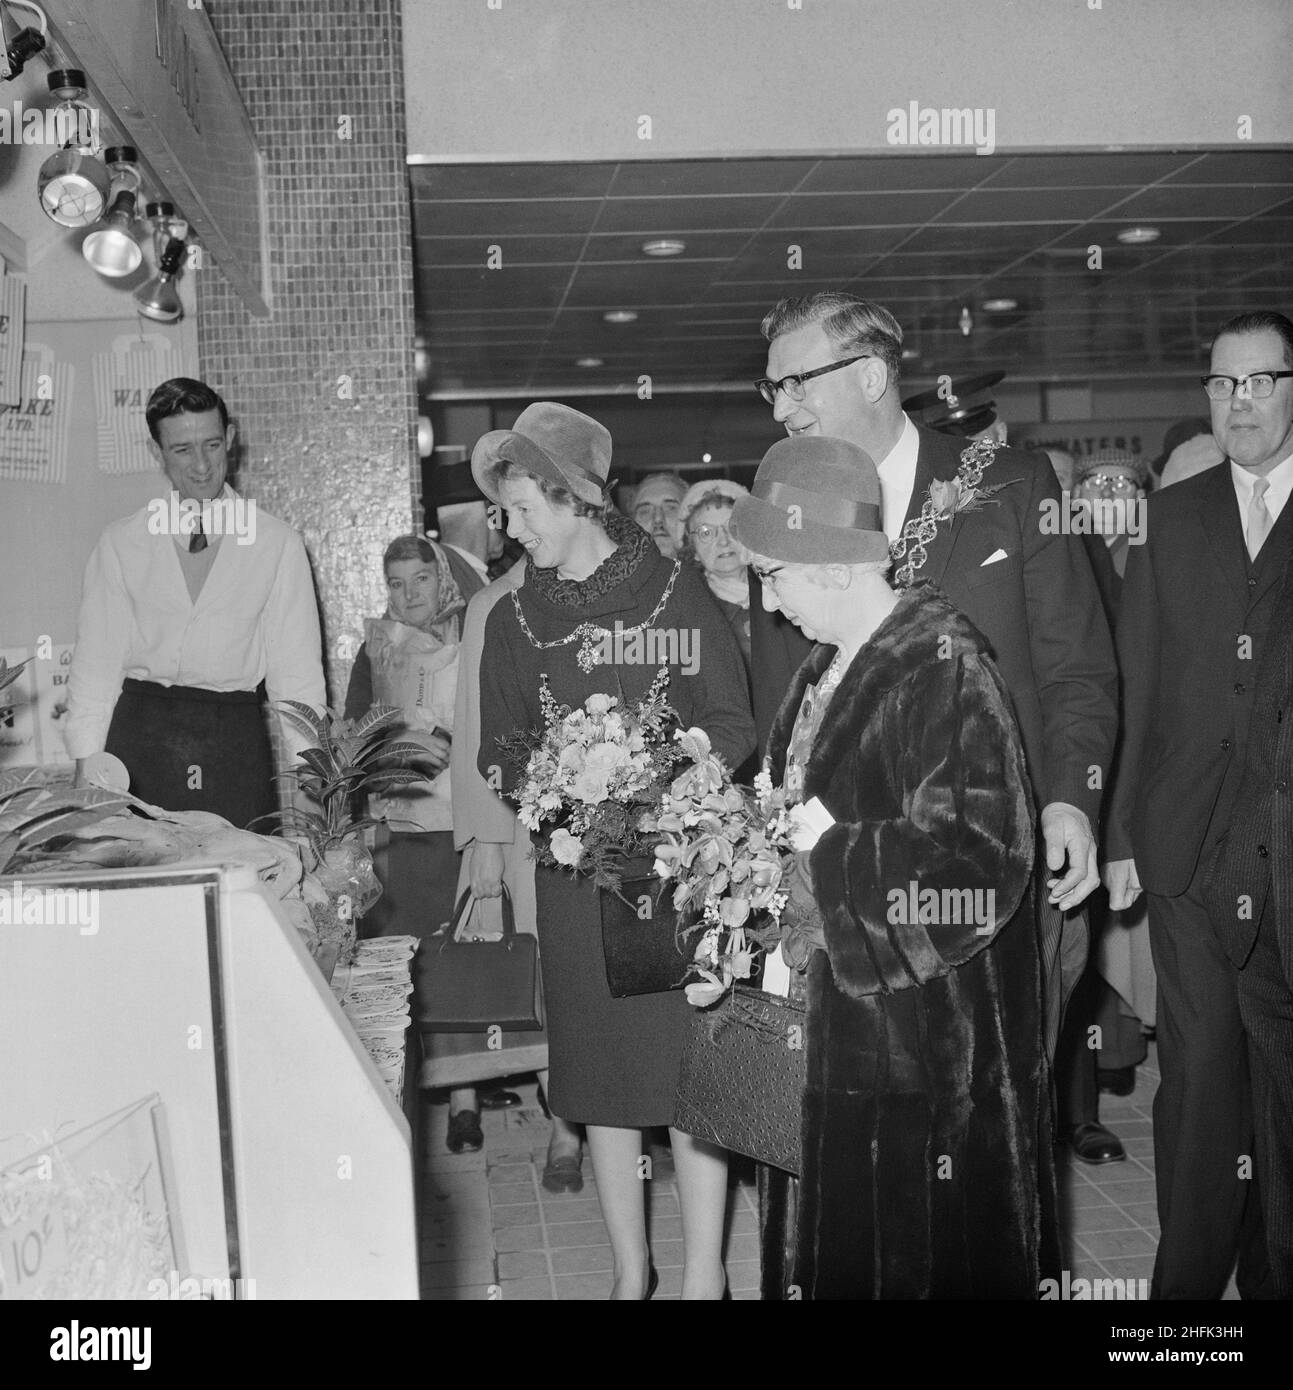 Bull Ring Centre, Birmingham, 14/11/1963. Dignitaries touring stalls during the official opening of the retail market at the Bull Ring Centre. On 14th November 1963, the retail market at the Bull Ring development was opened by the Lord Mayor of Birmingham, Alderman Dr. Louis Glass, JP. The new retail market replaced the old Market Hall building, which was originally built in 1835 but had suffered serious damage from an air strike in the Second World War. The general section of the new market housed 154 stalls, with a further 42 in the separate fish and poultry section. The dignitaries shown in Stock Photo